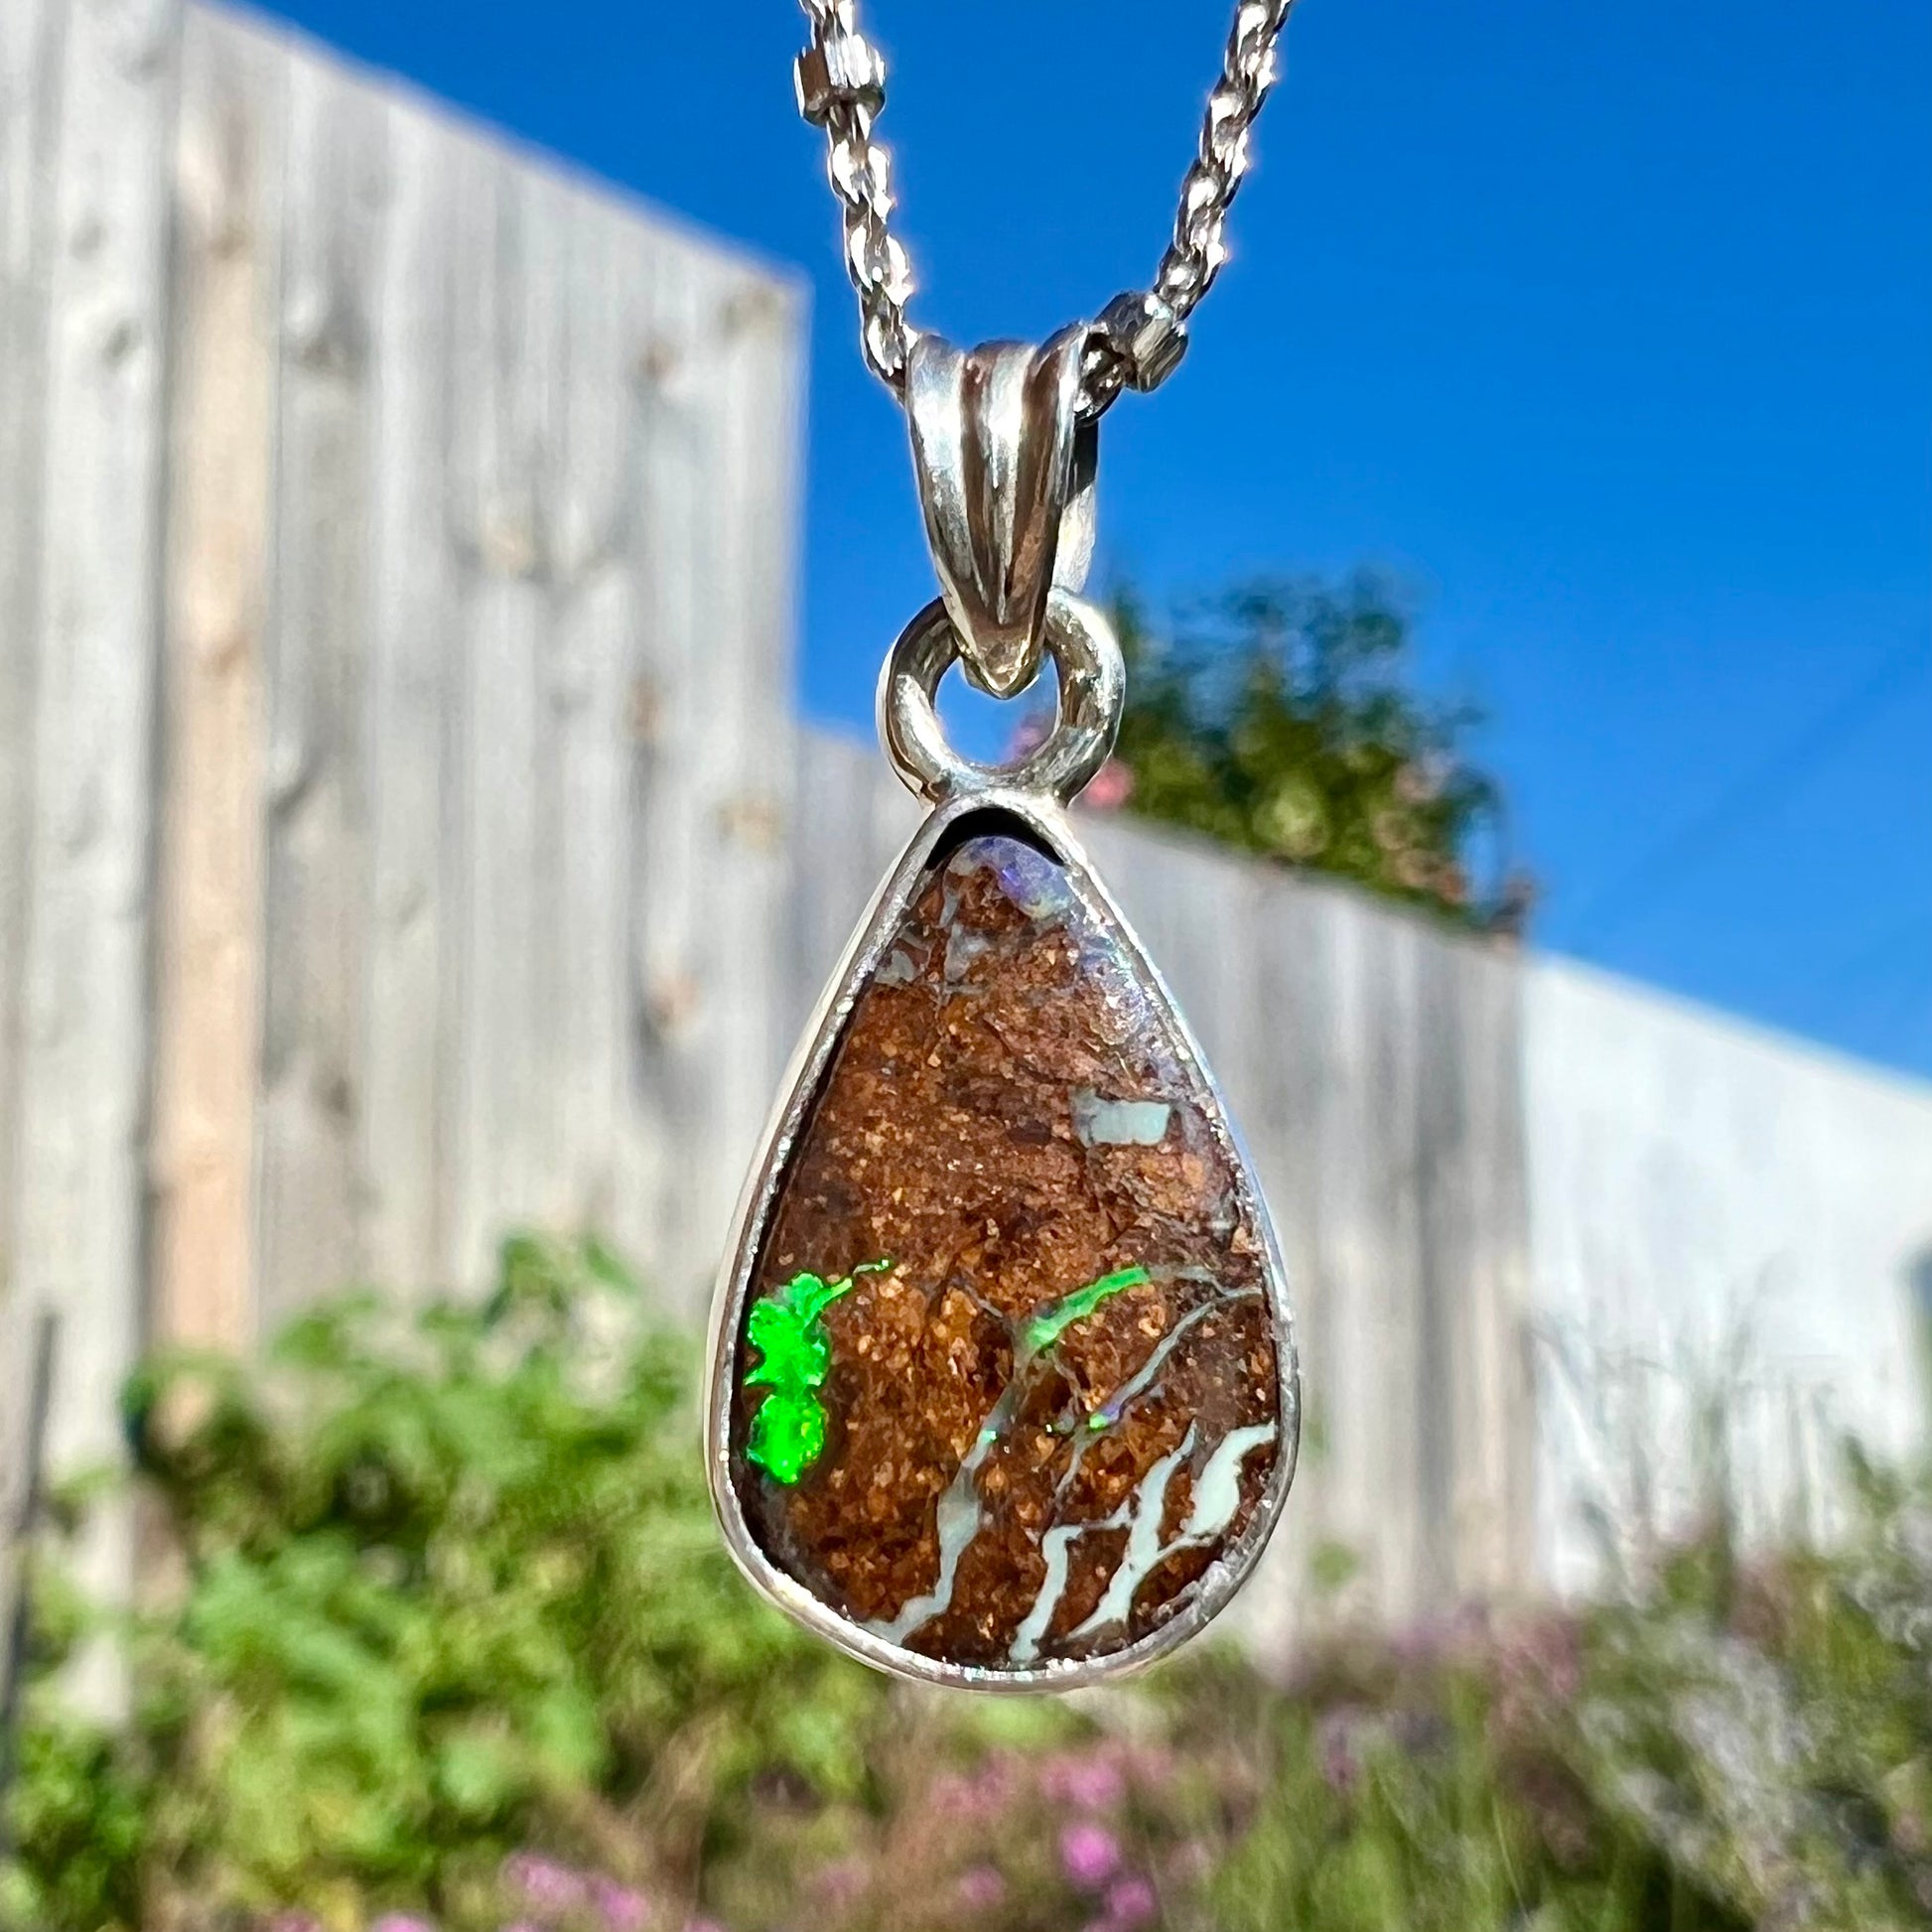 A pear shaped Australian boulder opal necklace in sterling silver.  The opal has bright flashes of green and blue colors.